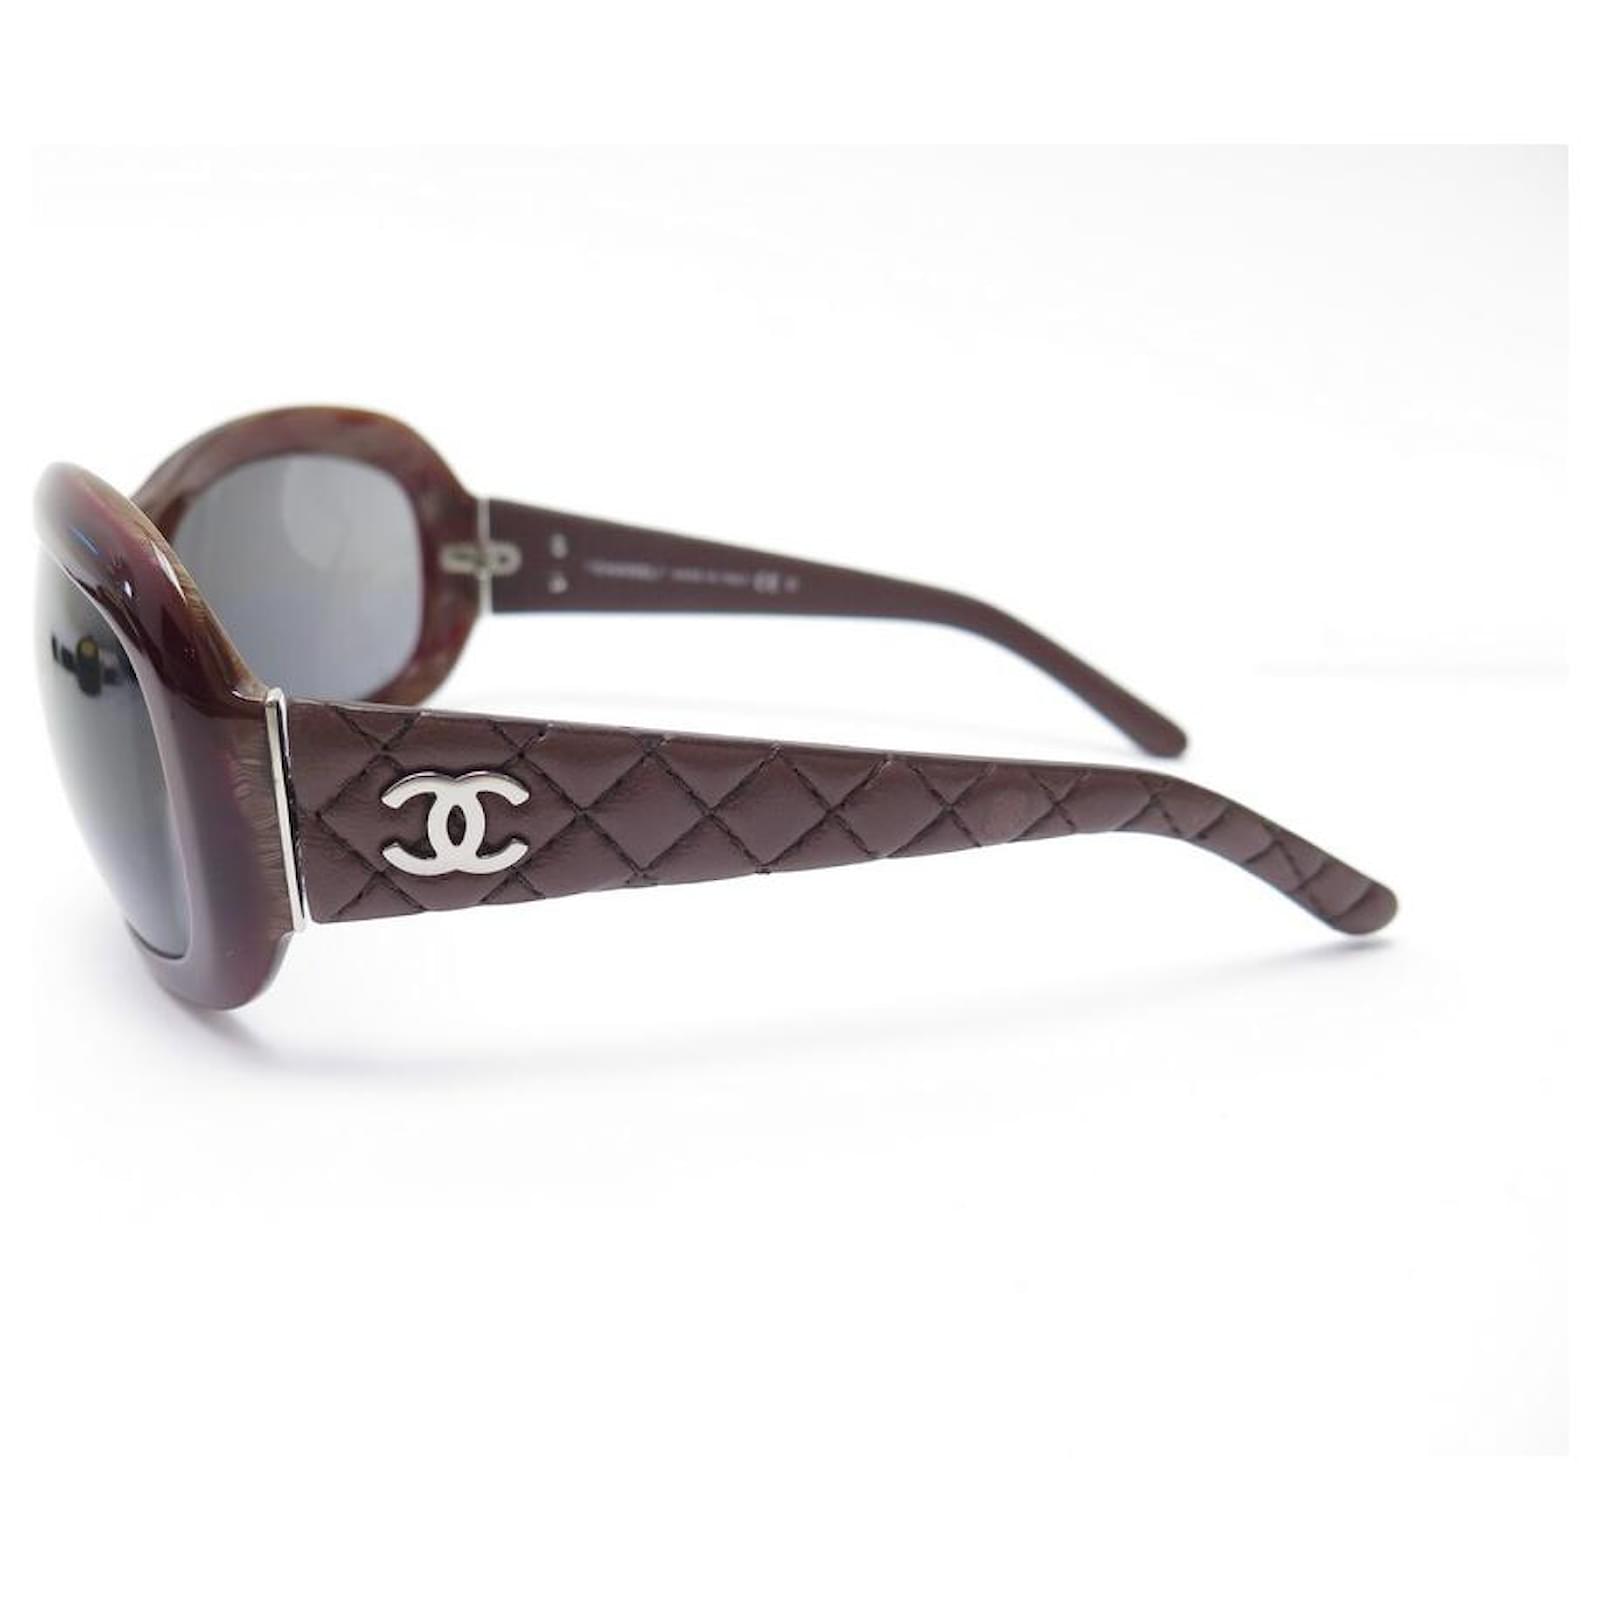 CHANEL Metallic Quilted CC Sunglasses 4157-Q Brown 583947